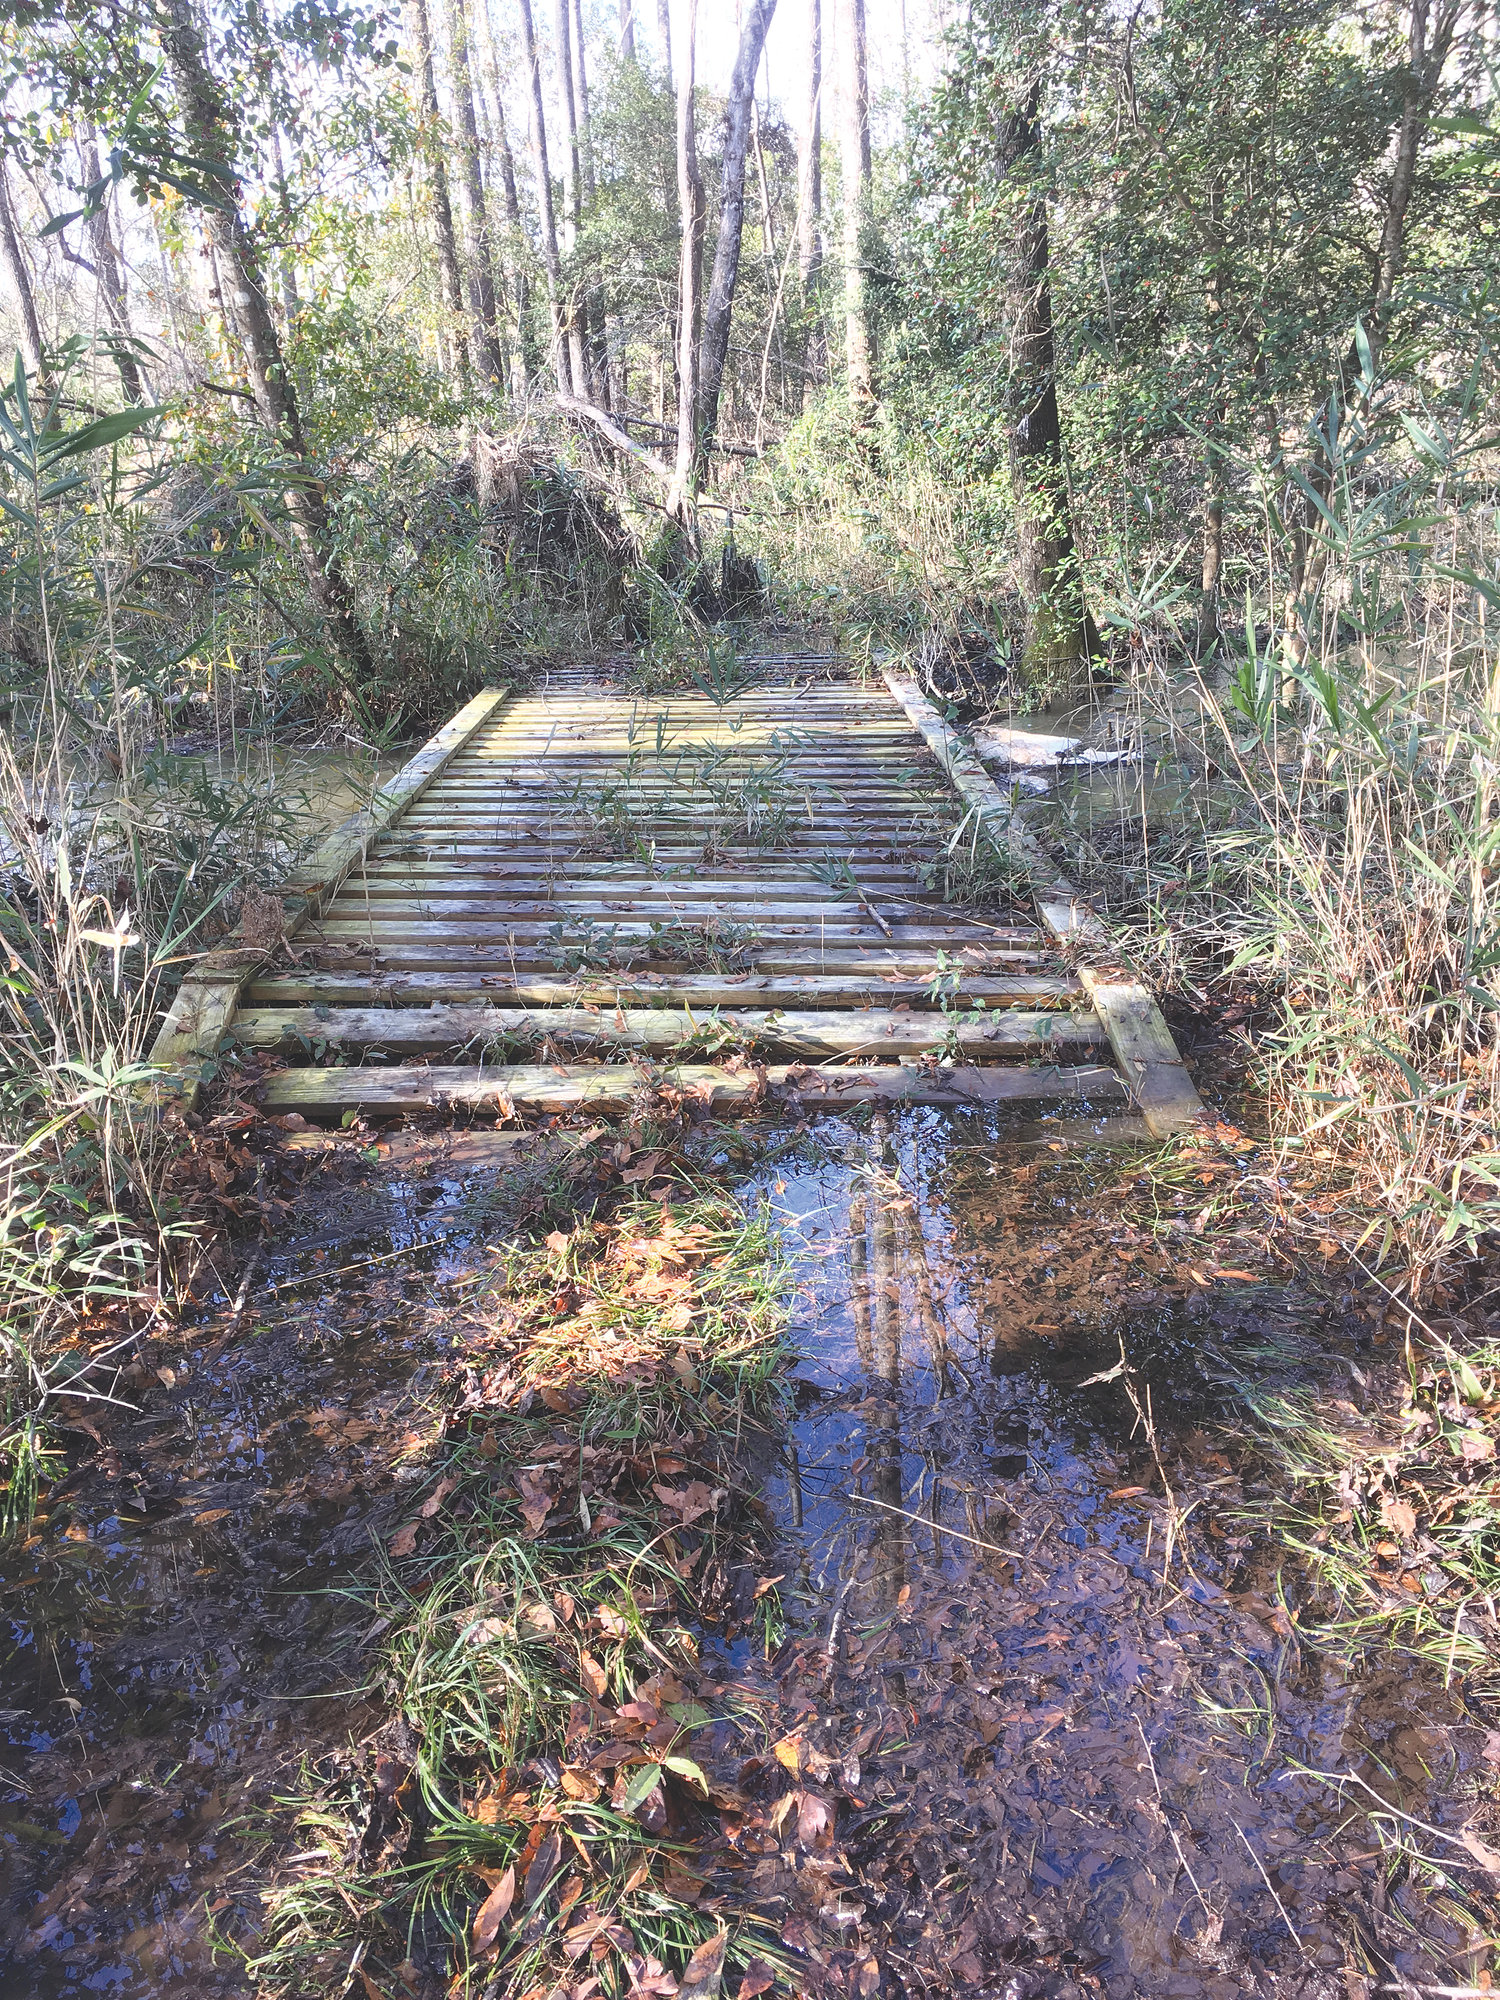 DAN GEDDINGS / SPECIAL TO THE SUMTER ITEMFinding a bridge on the creek was a nice surprise.